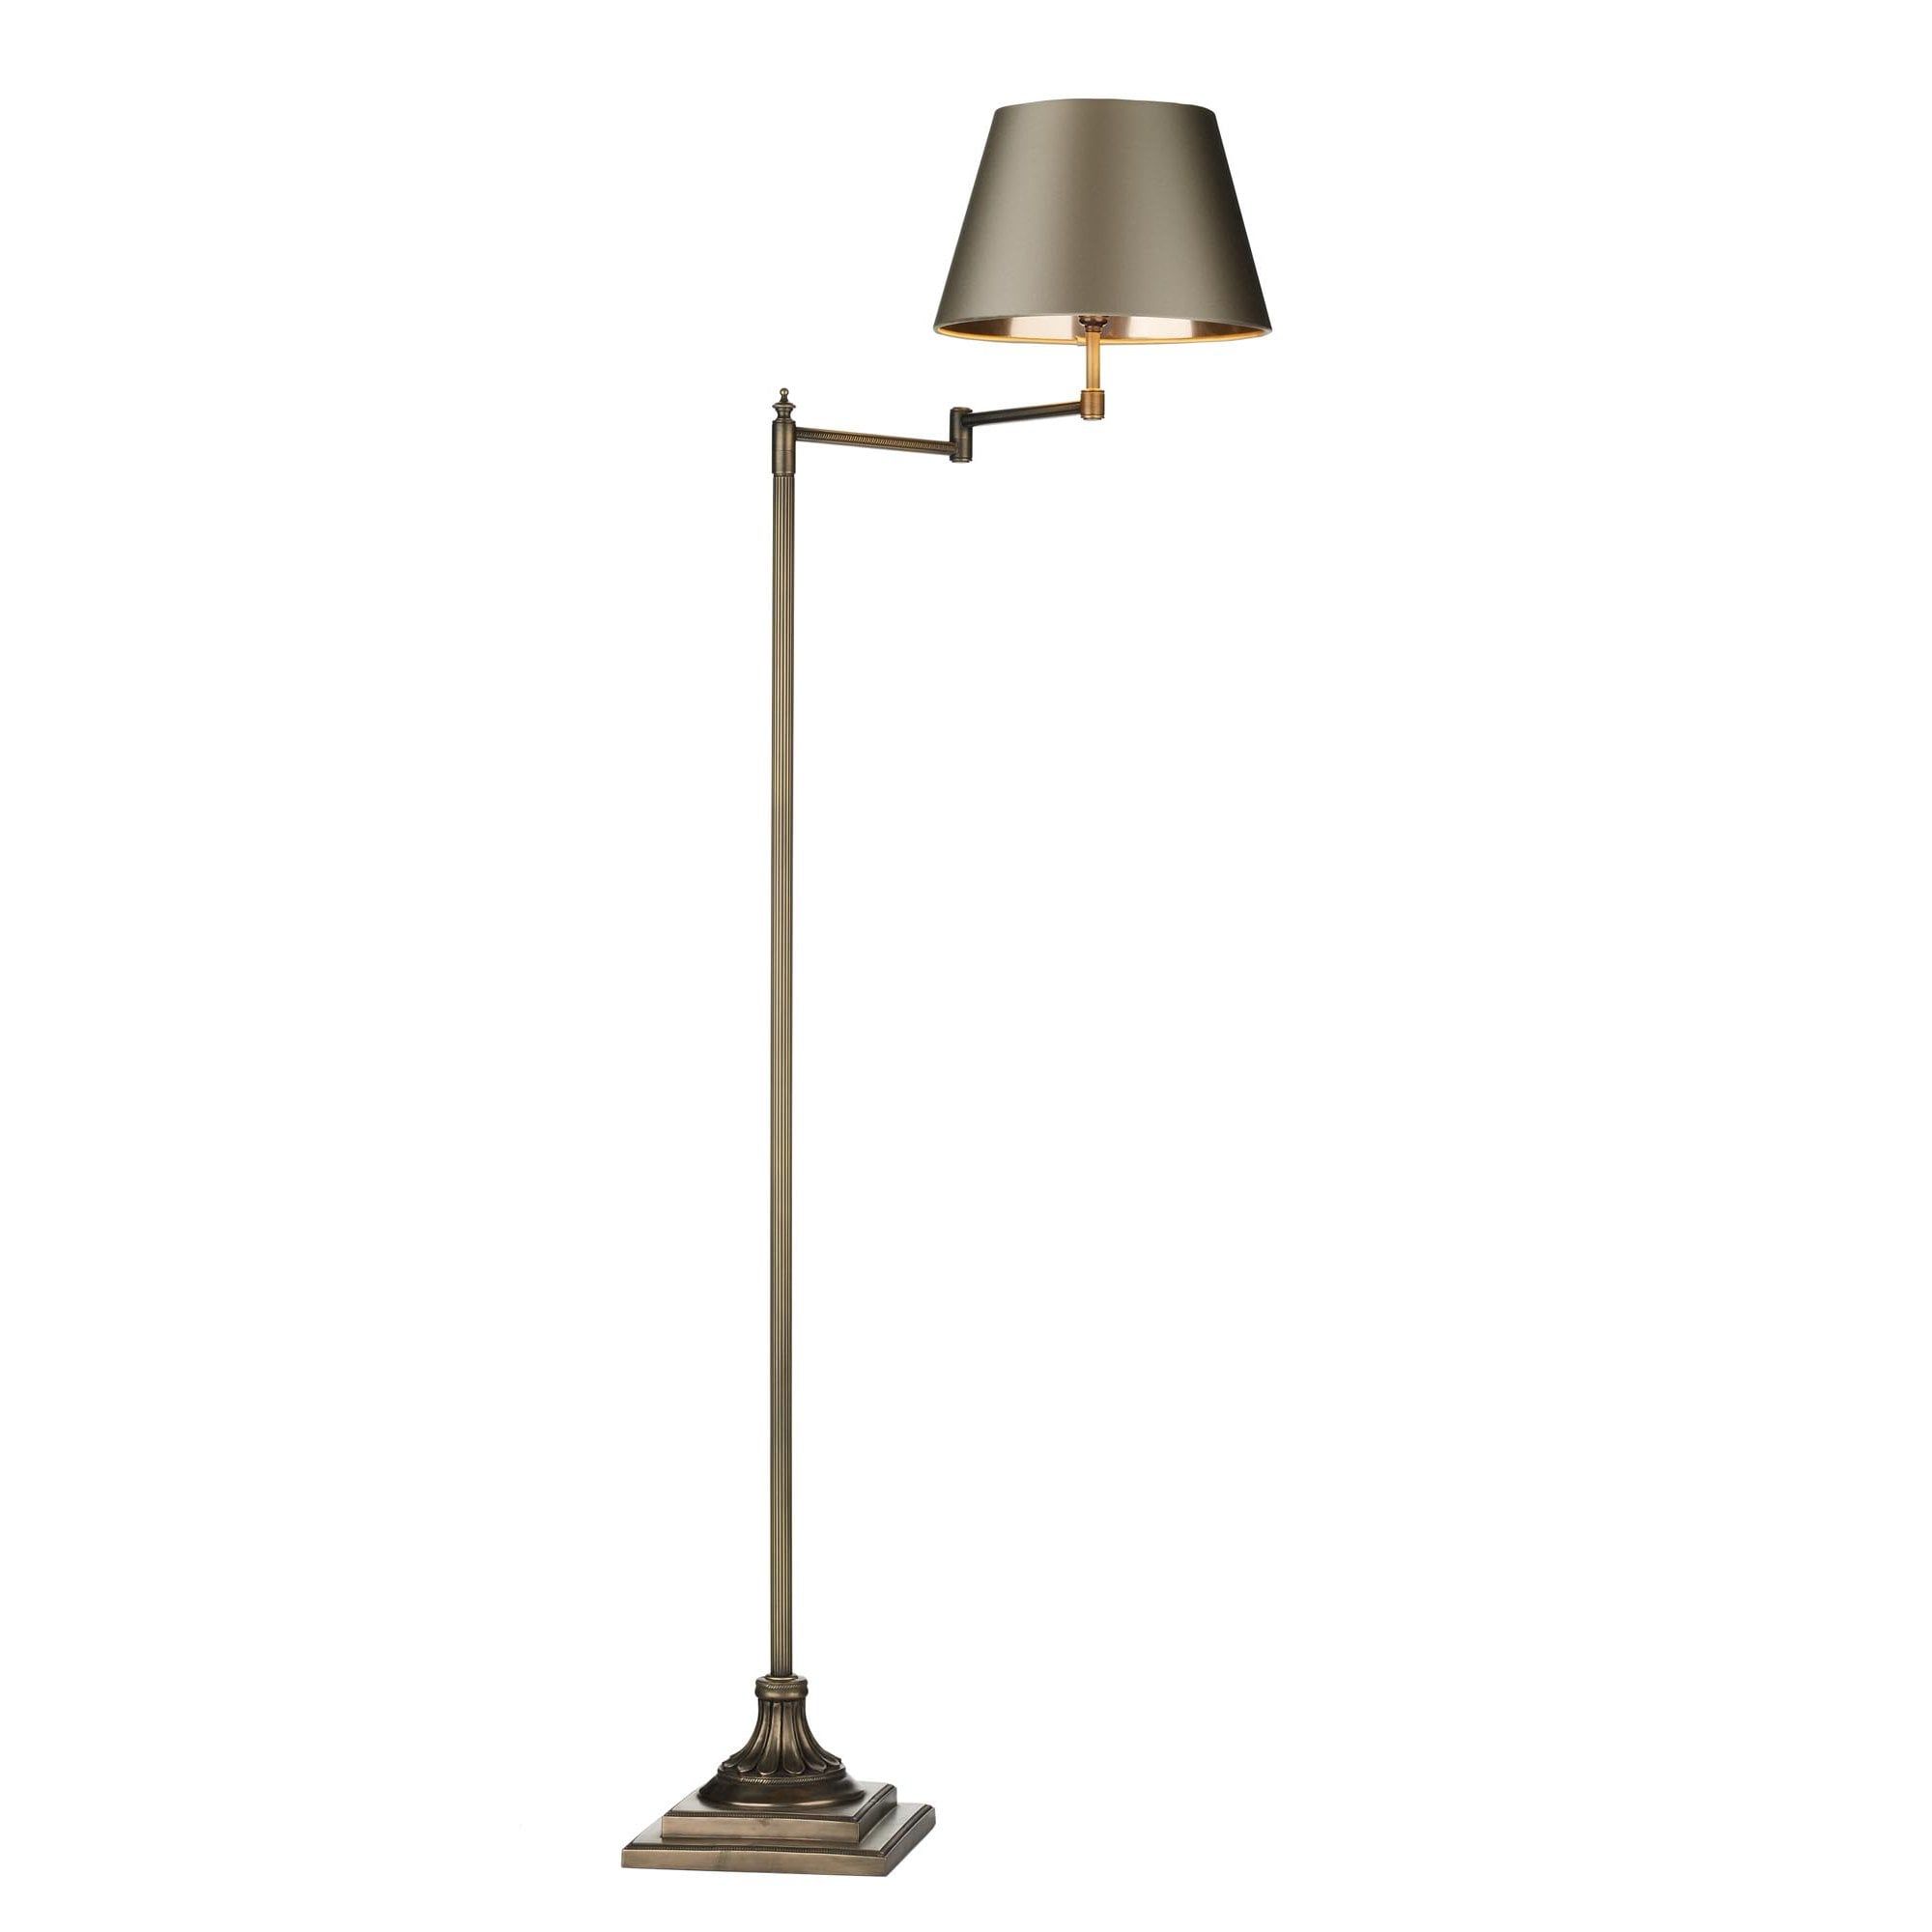 Floor Lamp Antique Brass With Swivel Arm Right Lighting And Lights Uk Inside Adjustble Arm Floor Lamps (View 8 of 15)